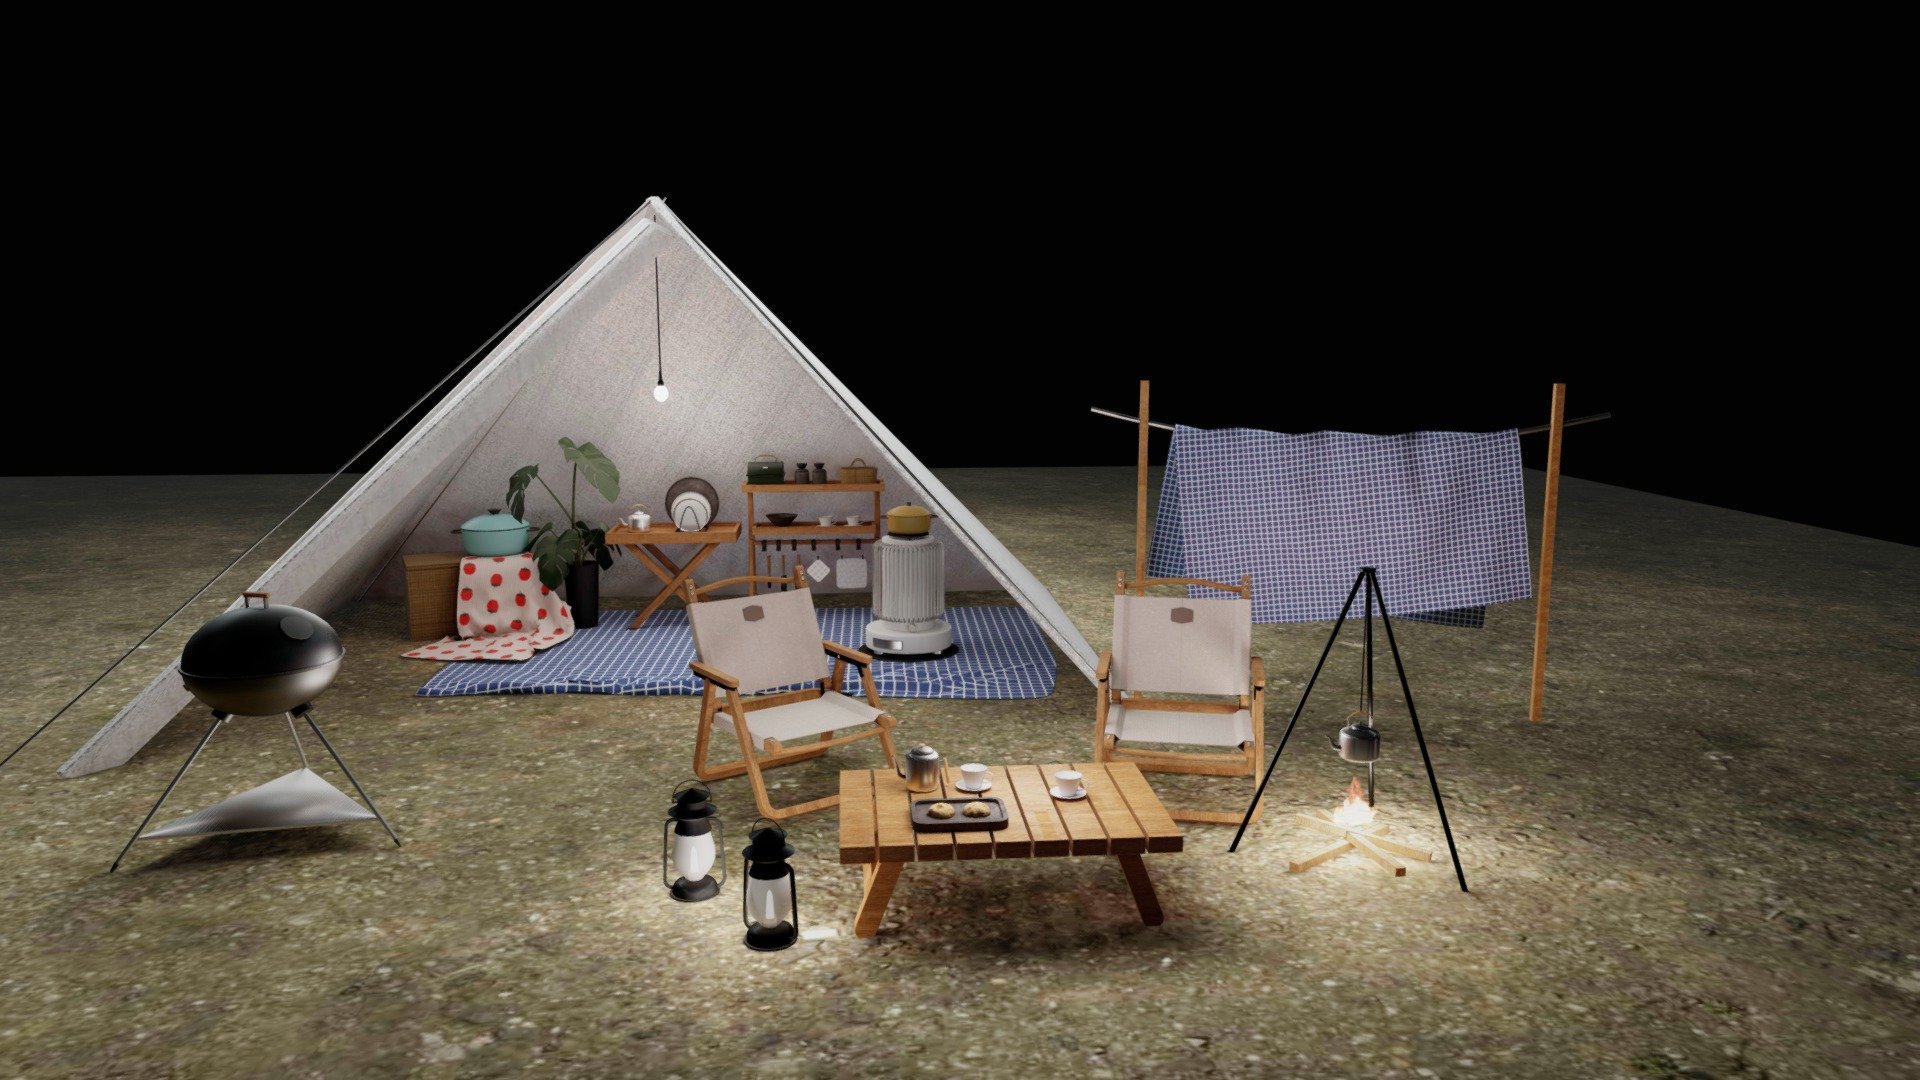 Summer comes, let's go camping together!

This is a tent for outdoor camping enthusiasts.
There are some camping supplies put in the tent. Two chairs and a small dining table are casually arranged with a coffee pot. Next to it is a picnic stove, linens to dry. Hot water on campfire.

textures baked, ready for games or other applications - tent camp outdoor campsite baked - Buy Royalty Free 3D model by QuarizonStudio 3d model